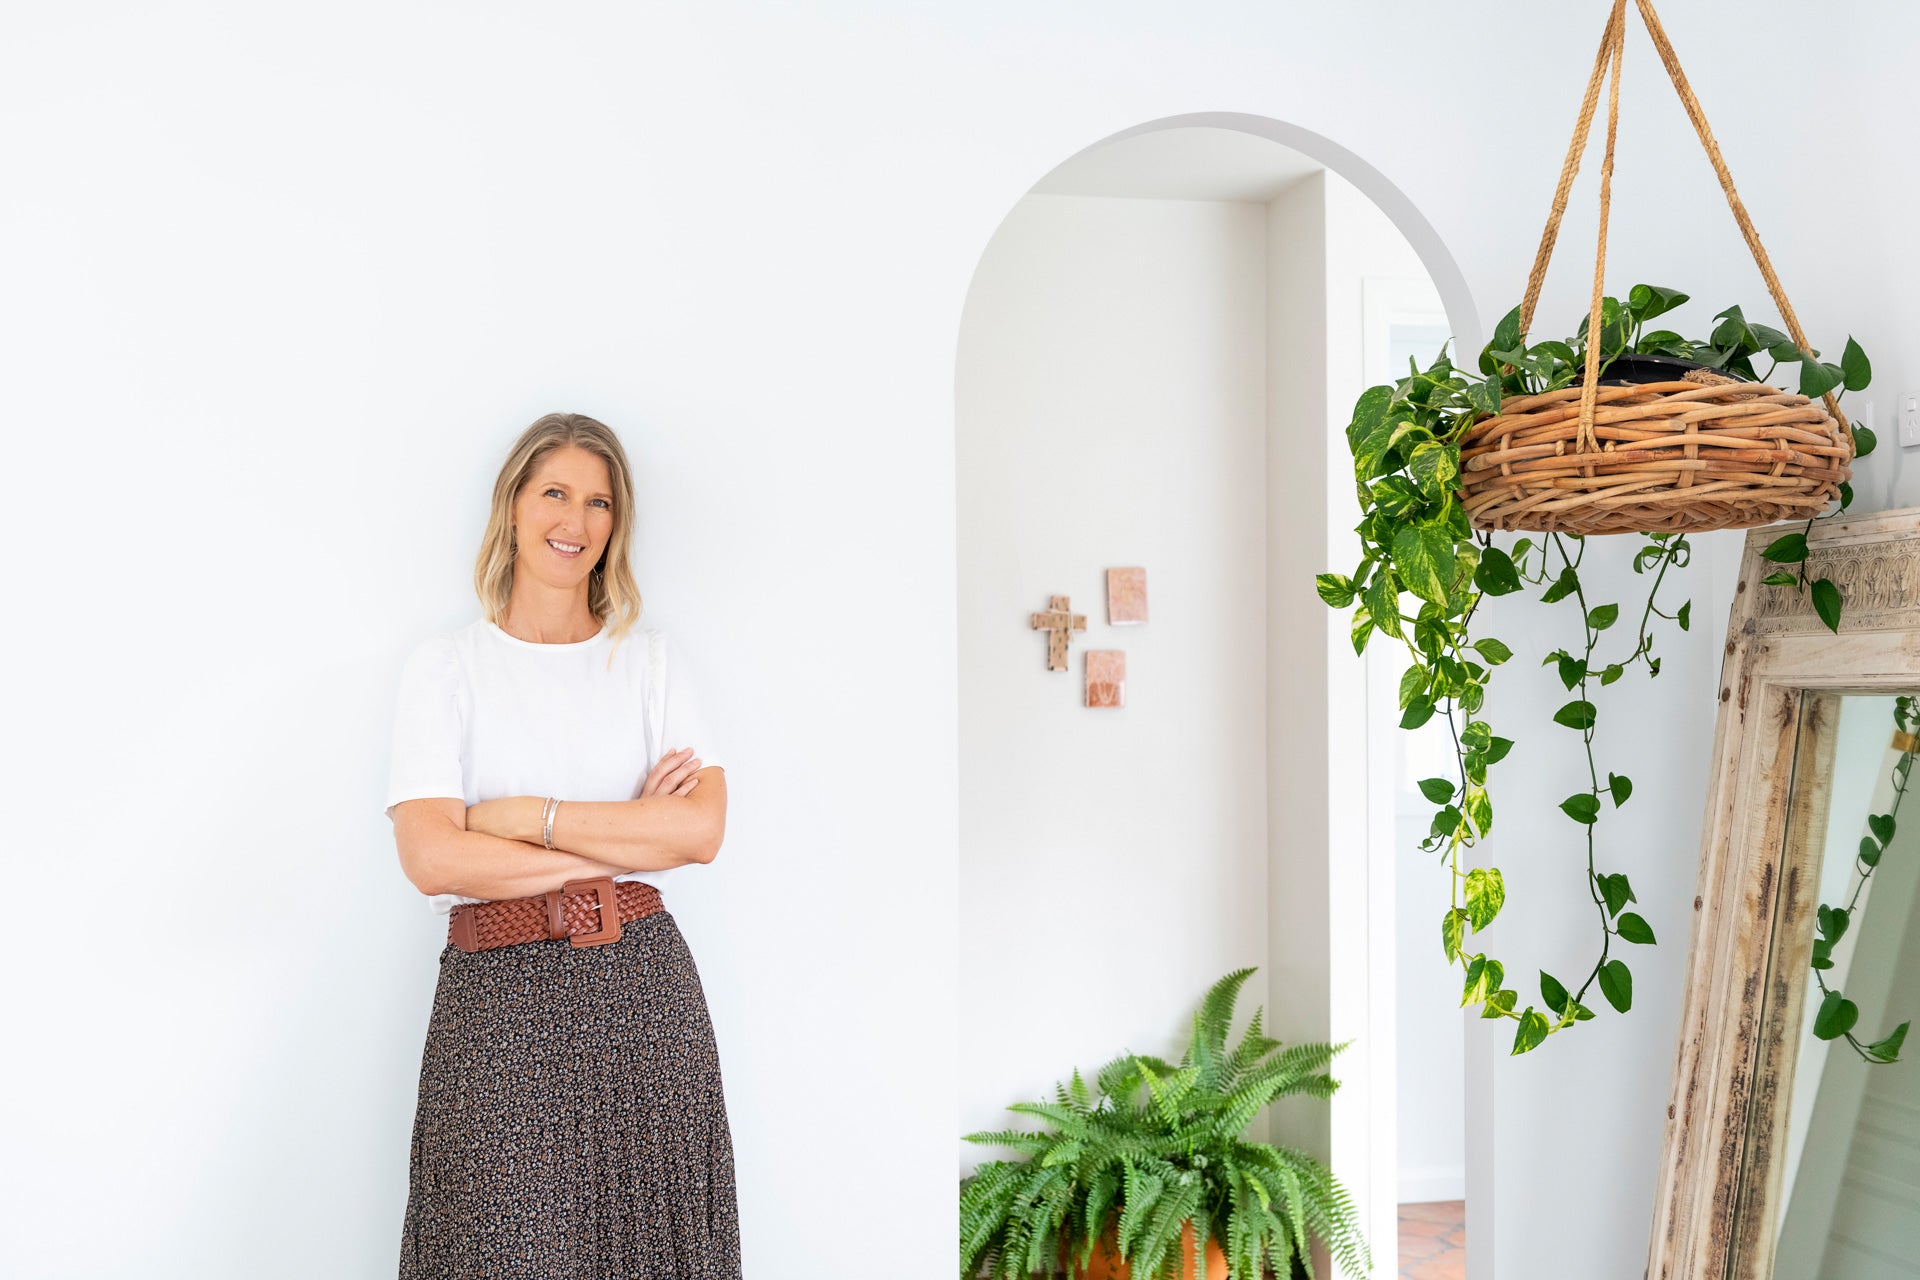 Anna the founder of Lighthouse Lane is standing with her arms casually crossed against a white wall. To her right is a hanging basket of green pothos and in the background is a lush fern.